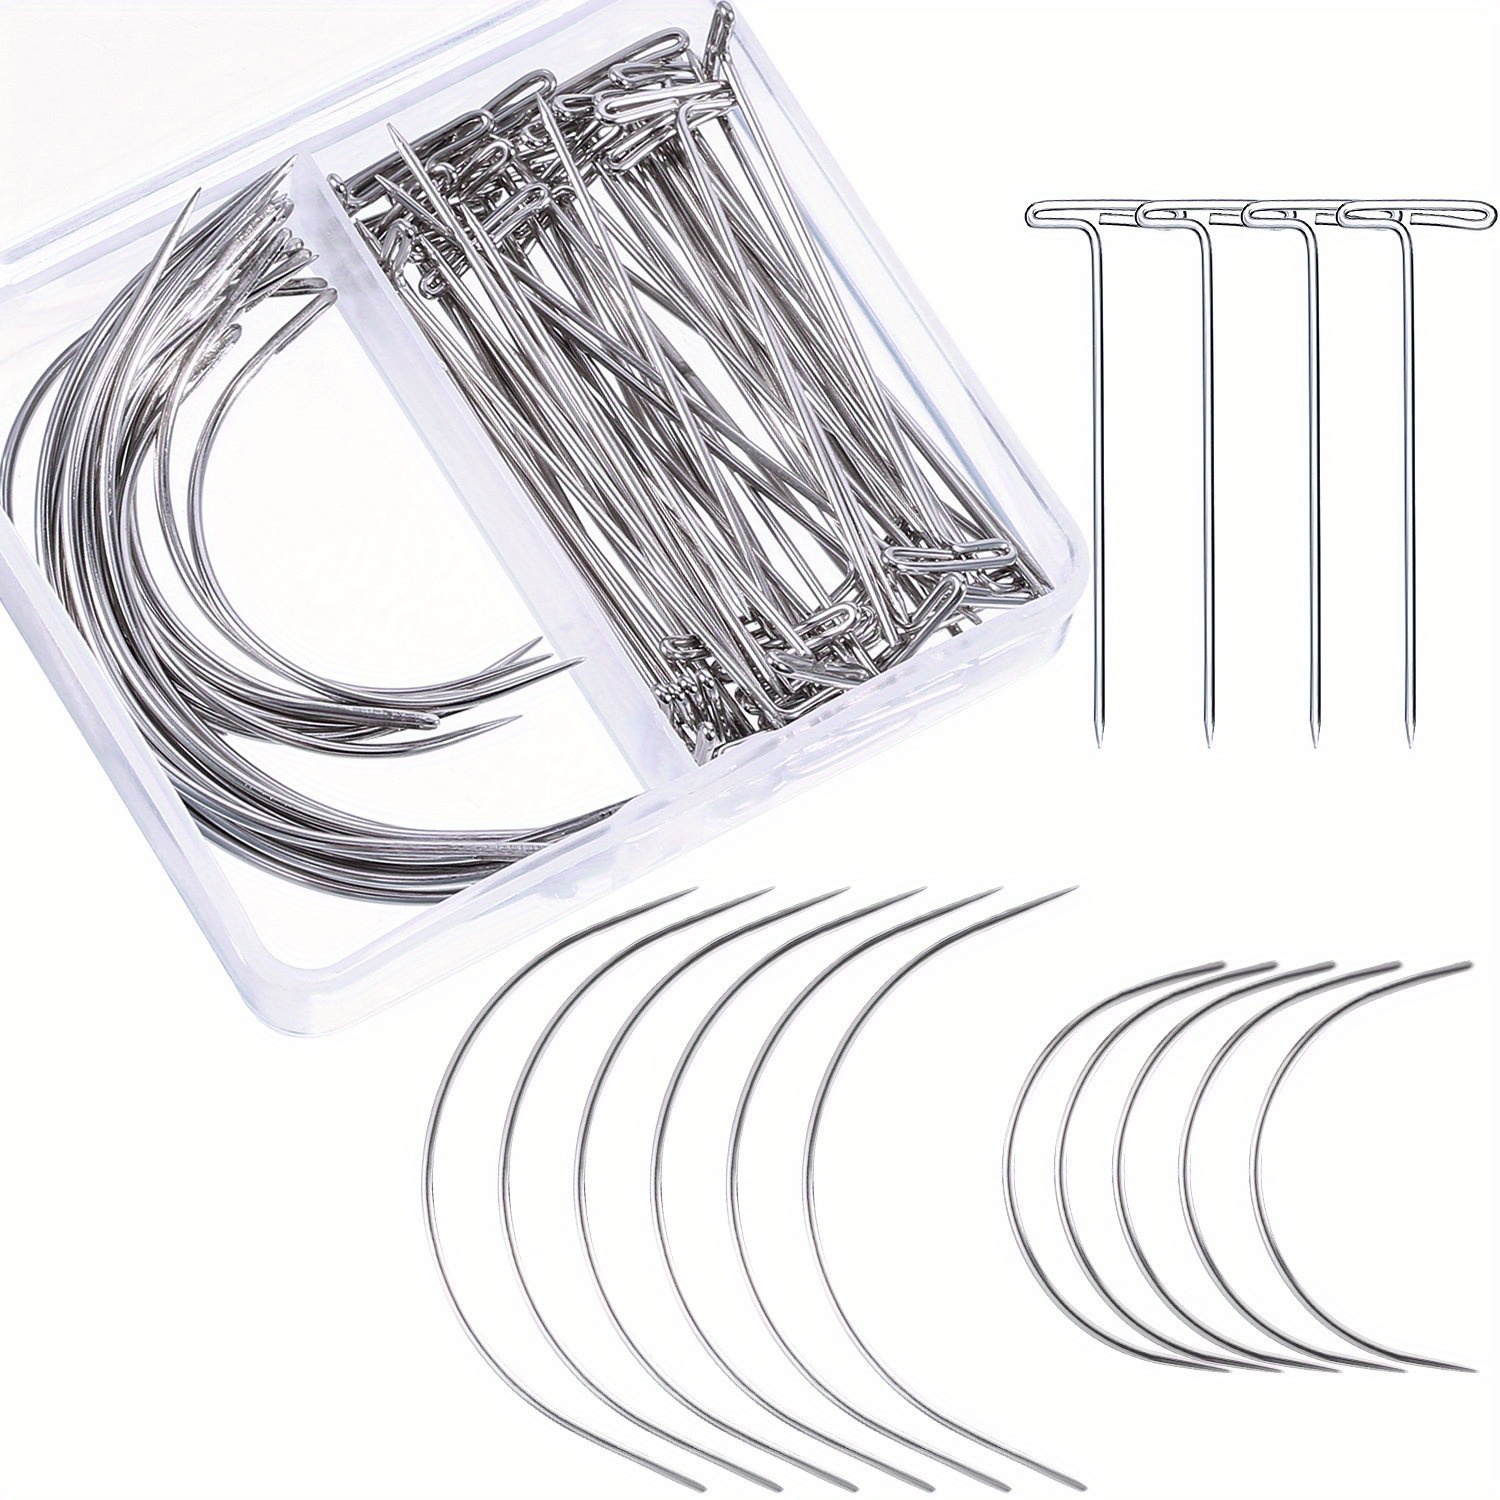 200 Pack Wig T-pins in 3 Sizes Wig T-pins, T Pins for Sewing, Blocking